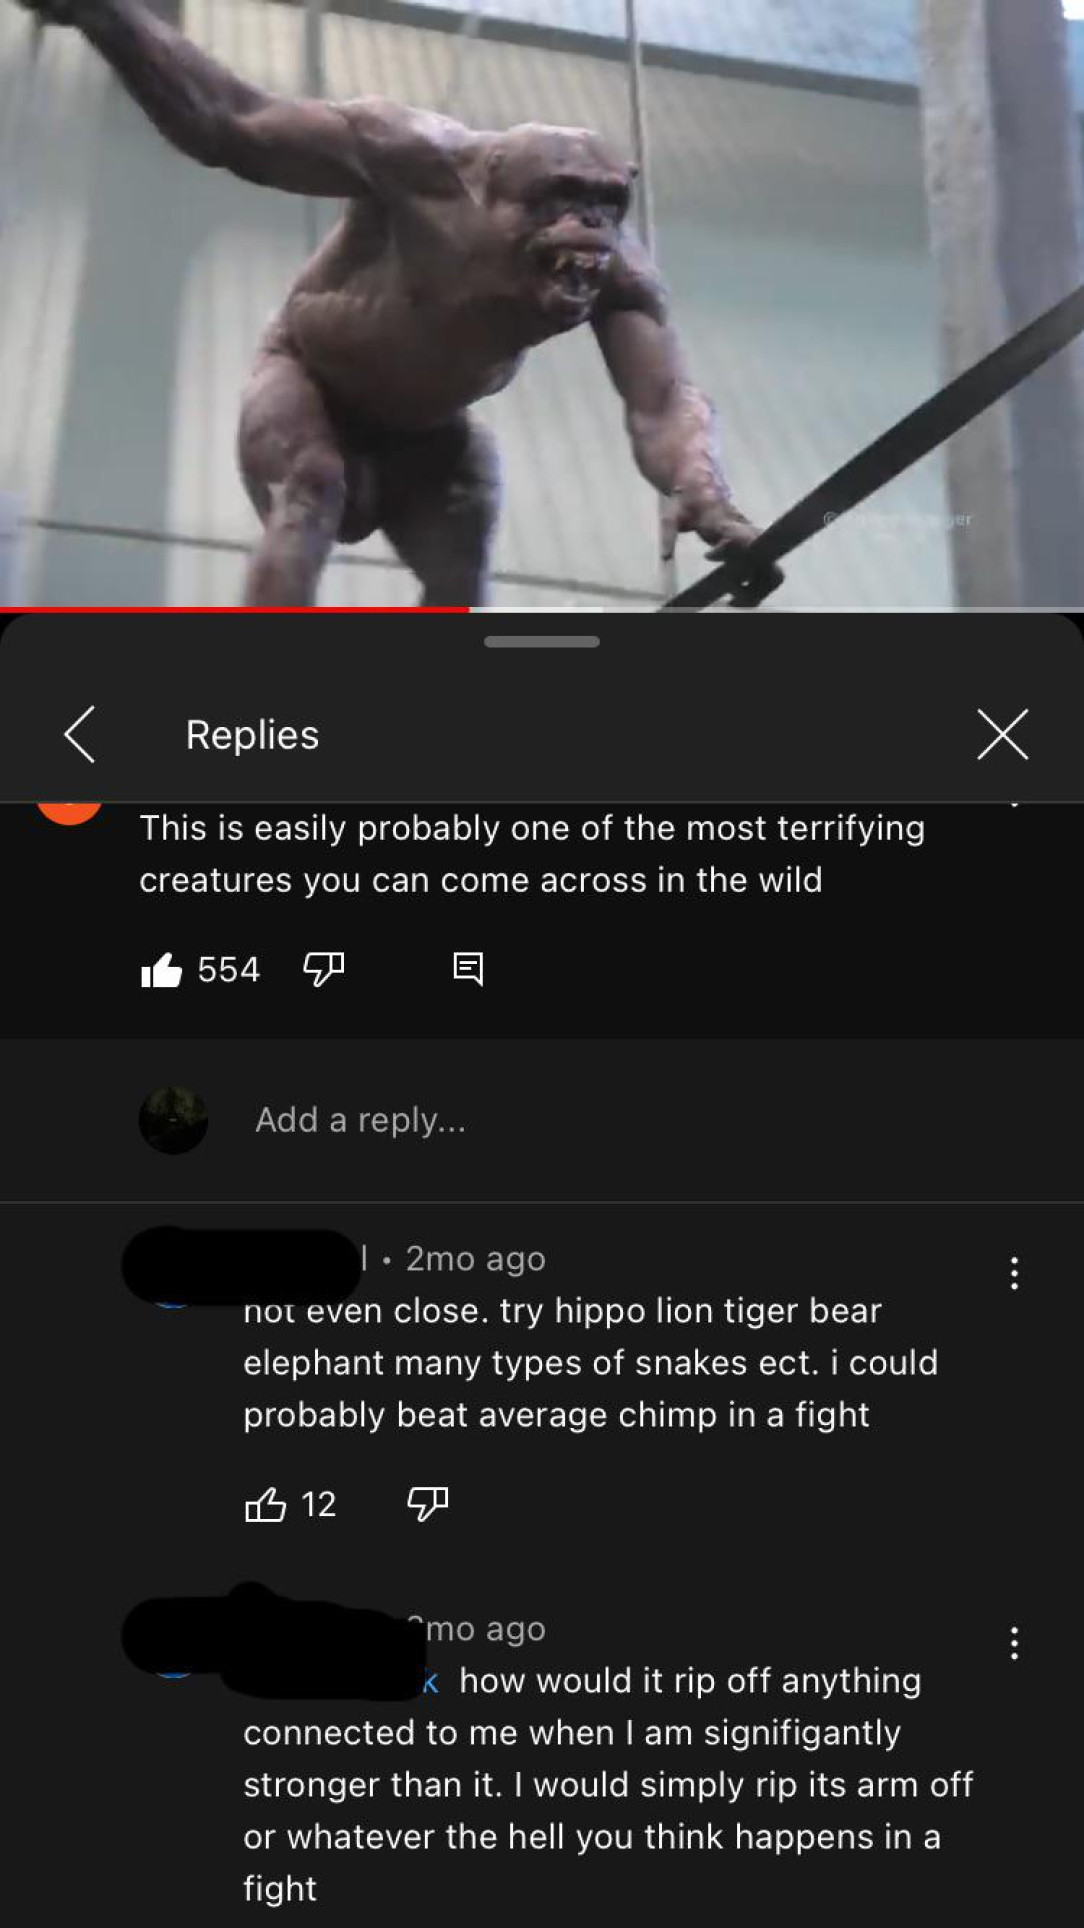 Amateur MMA Fighter thinks he can take on a chimpanzee